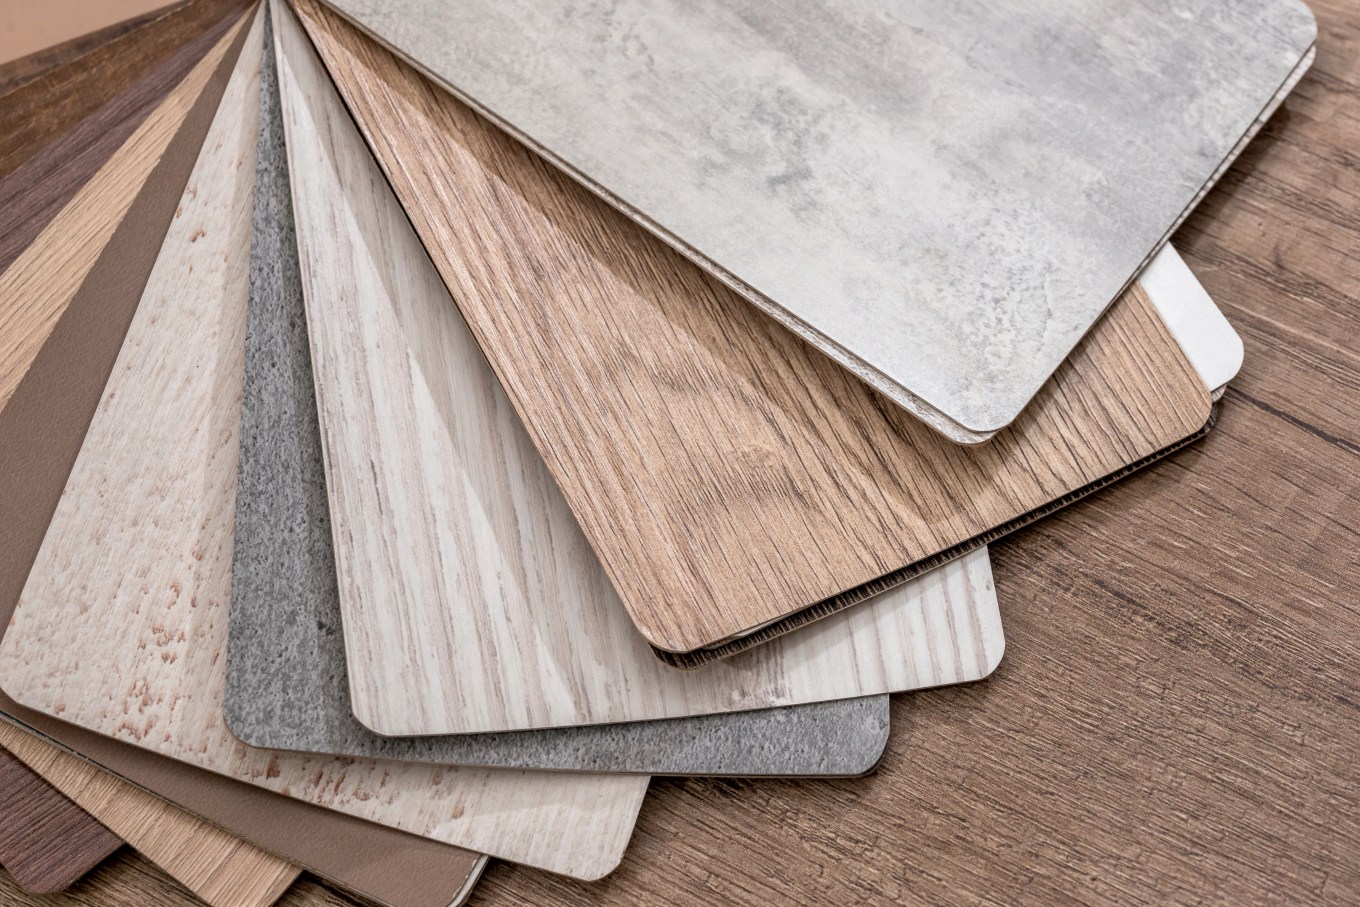 swatches of laminate wood flooring with different colors and textures